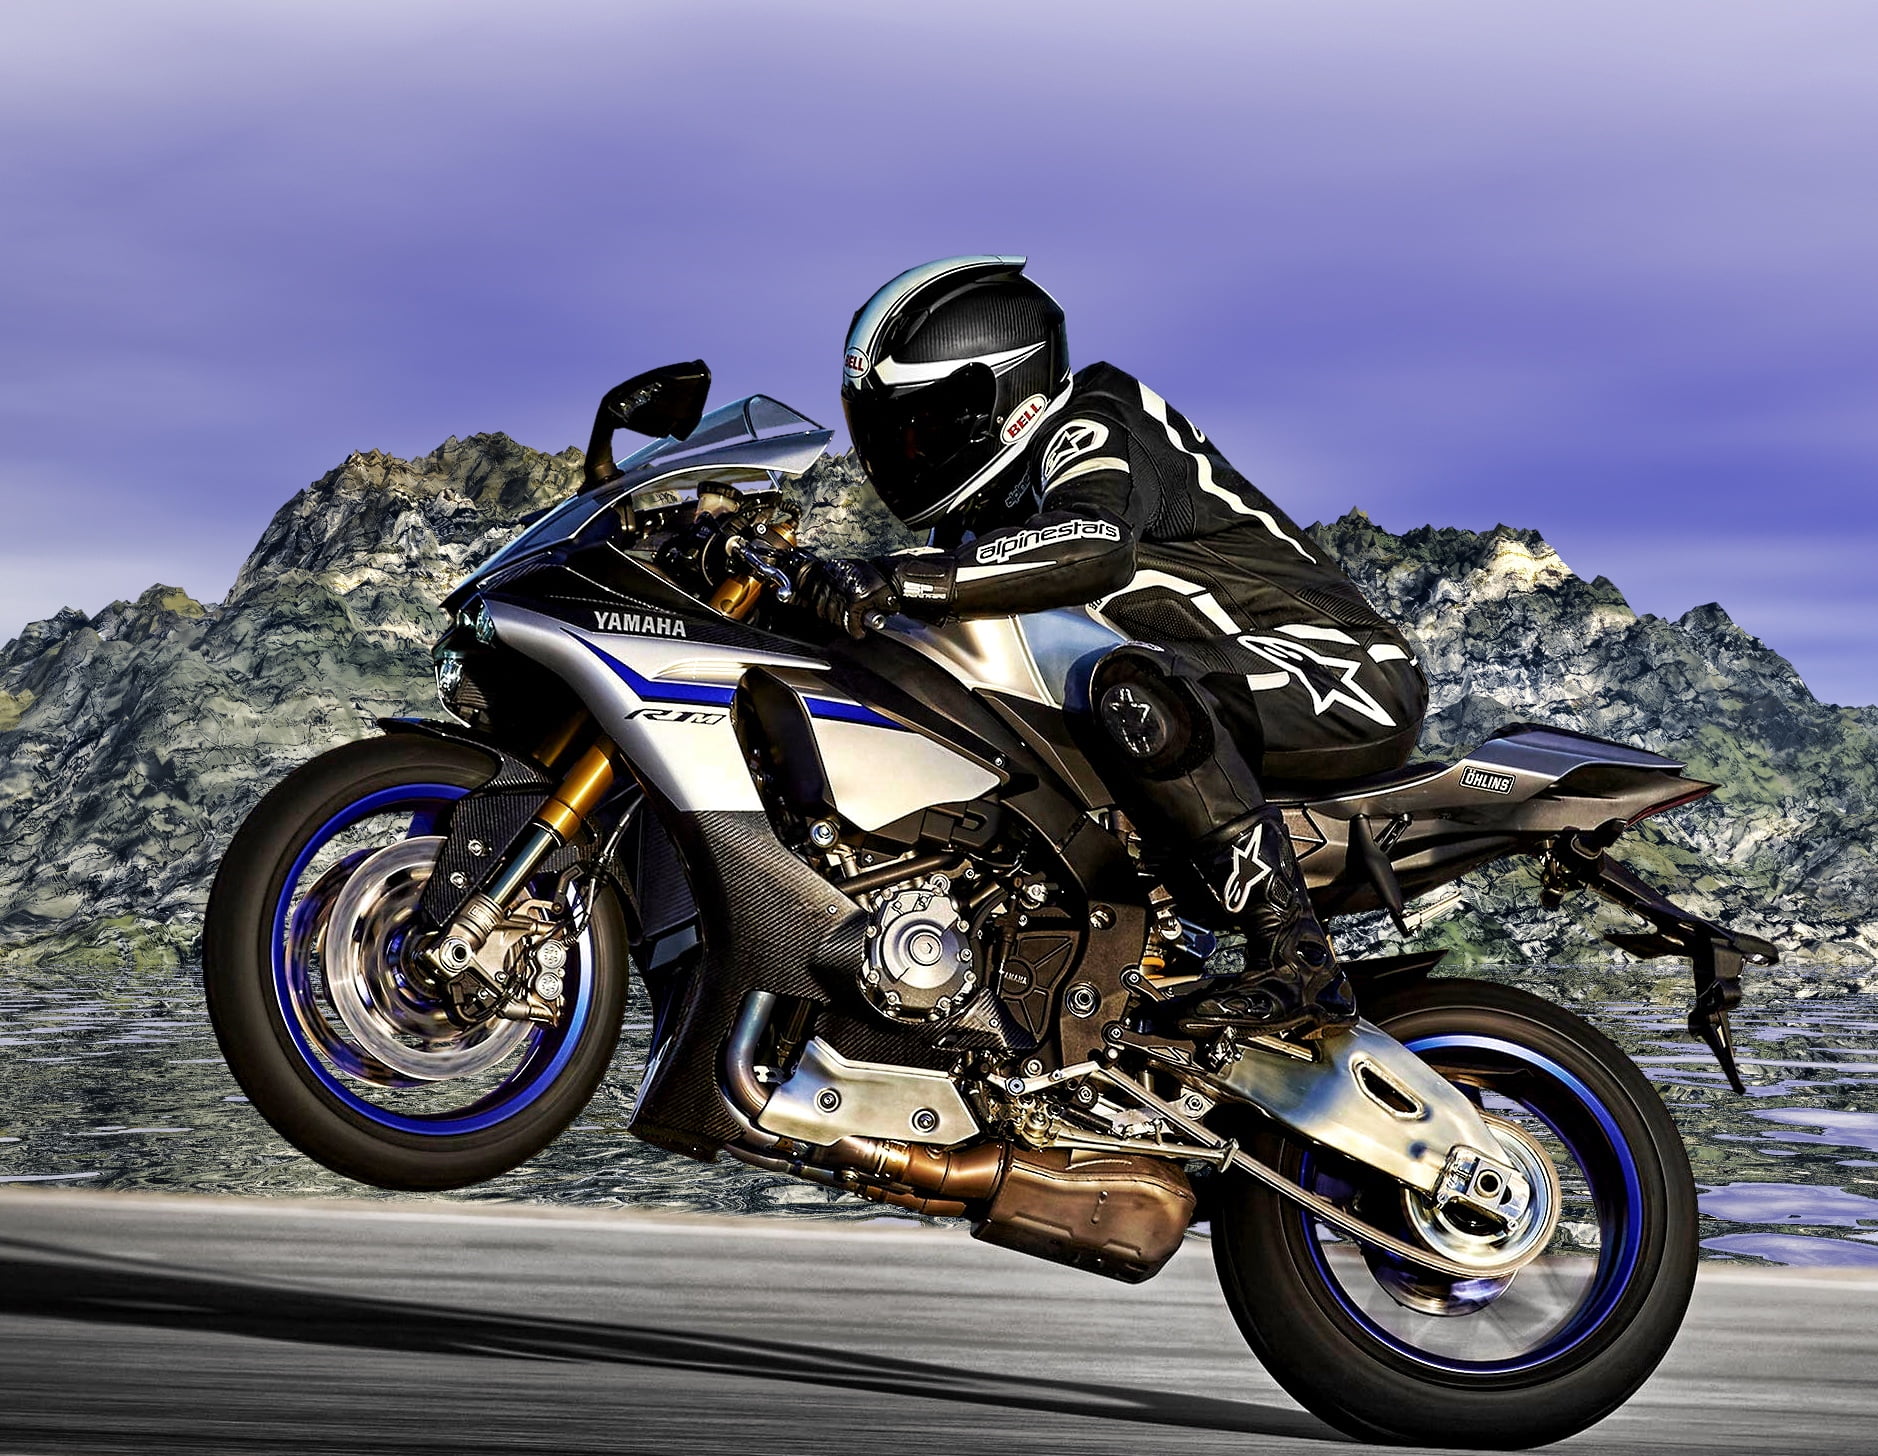 Man In Black Alpine Star Motorcycle Suit Riding Blue - Yamaha R1m , HD Wallpaper & Backgrounds